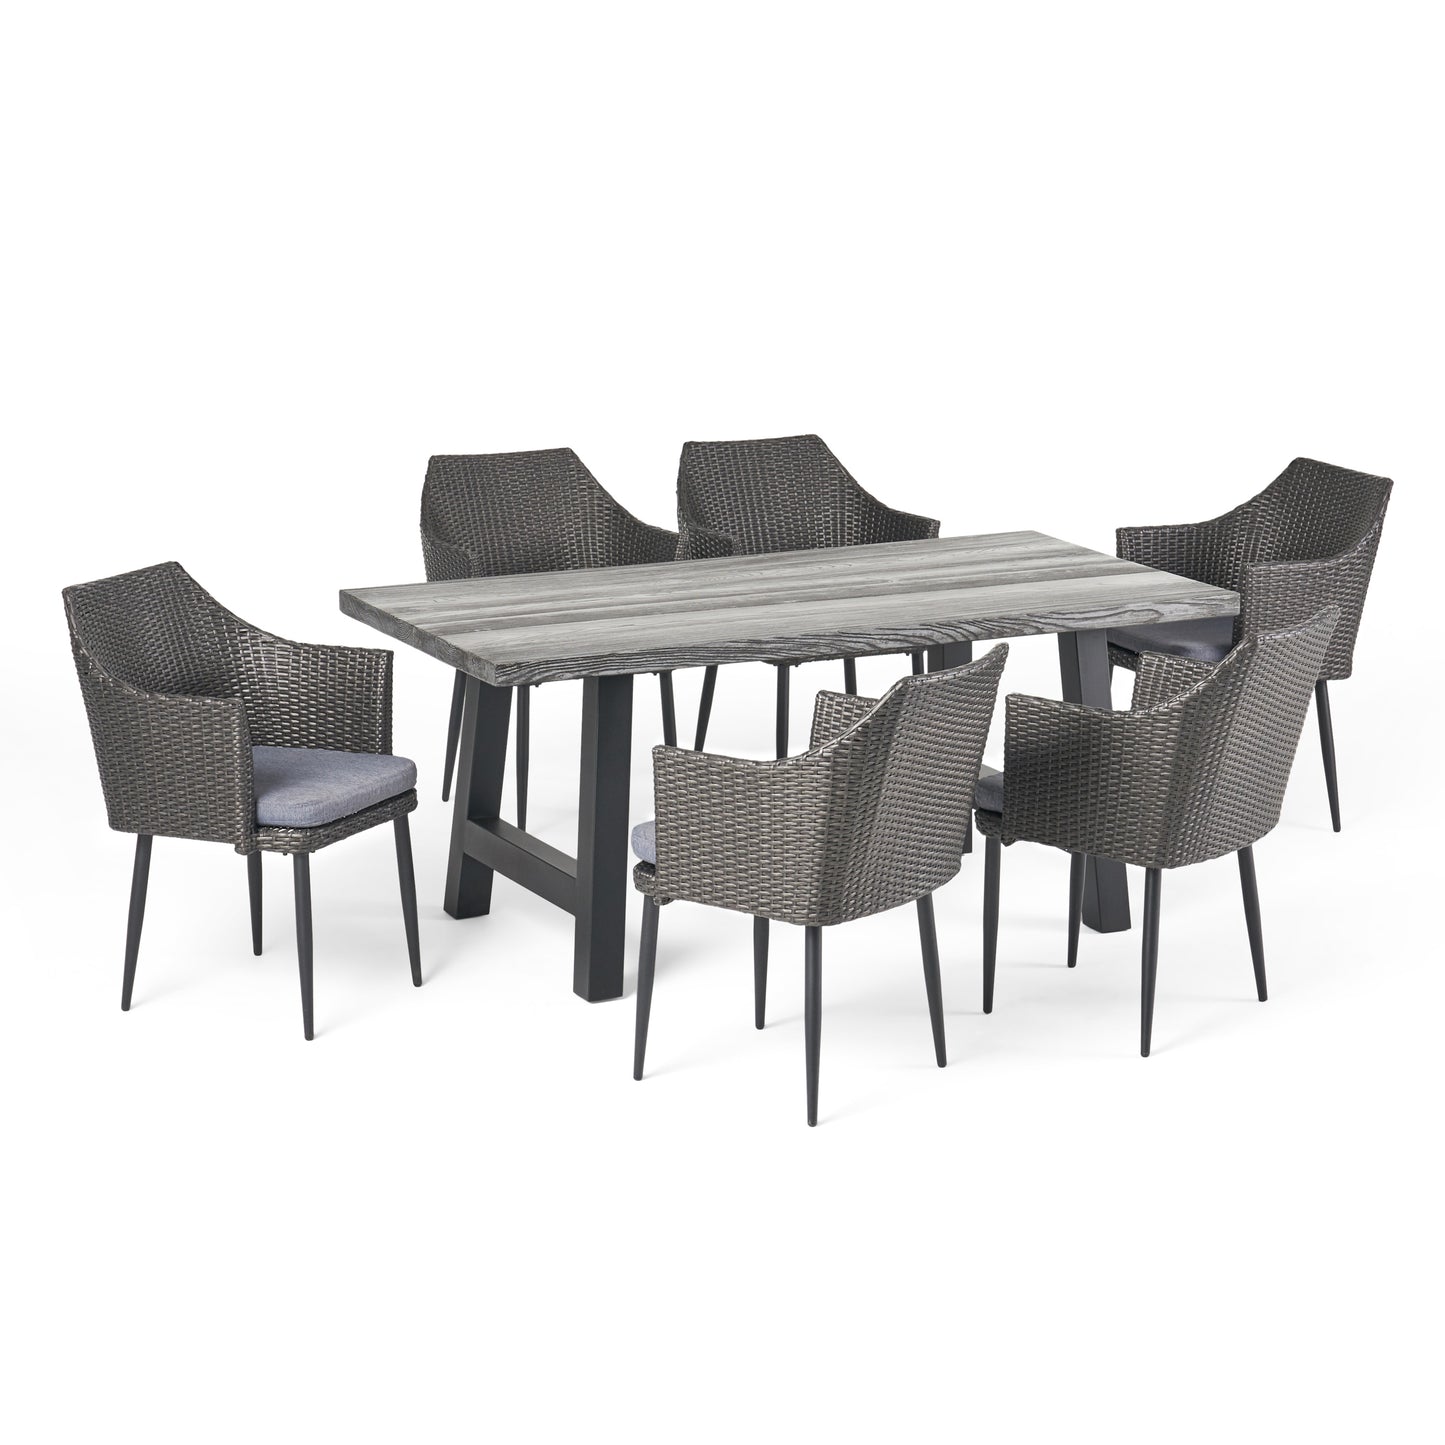 Blanche Outdoor 7 Piece Wicker Dining Set with Concrete Table